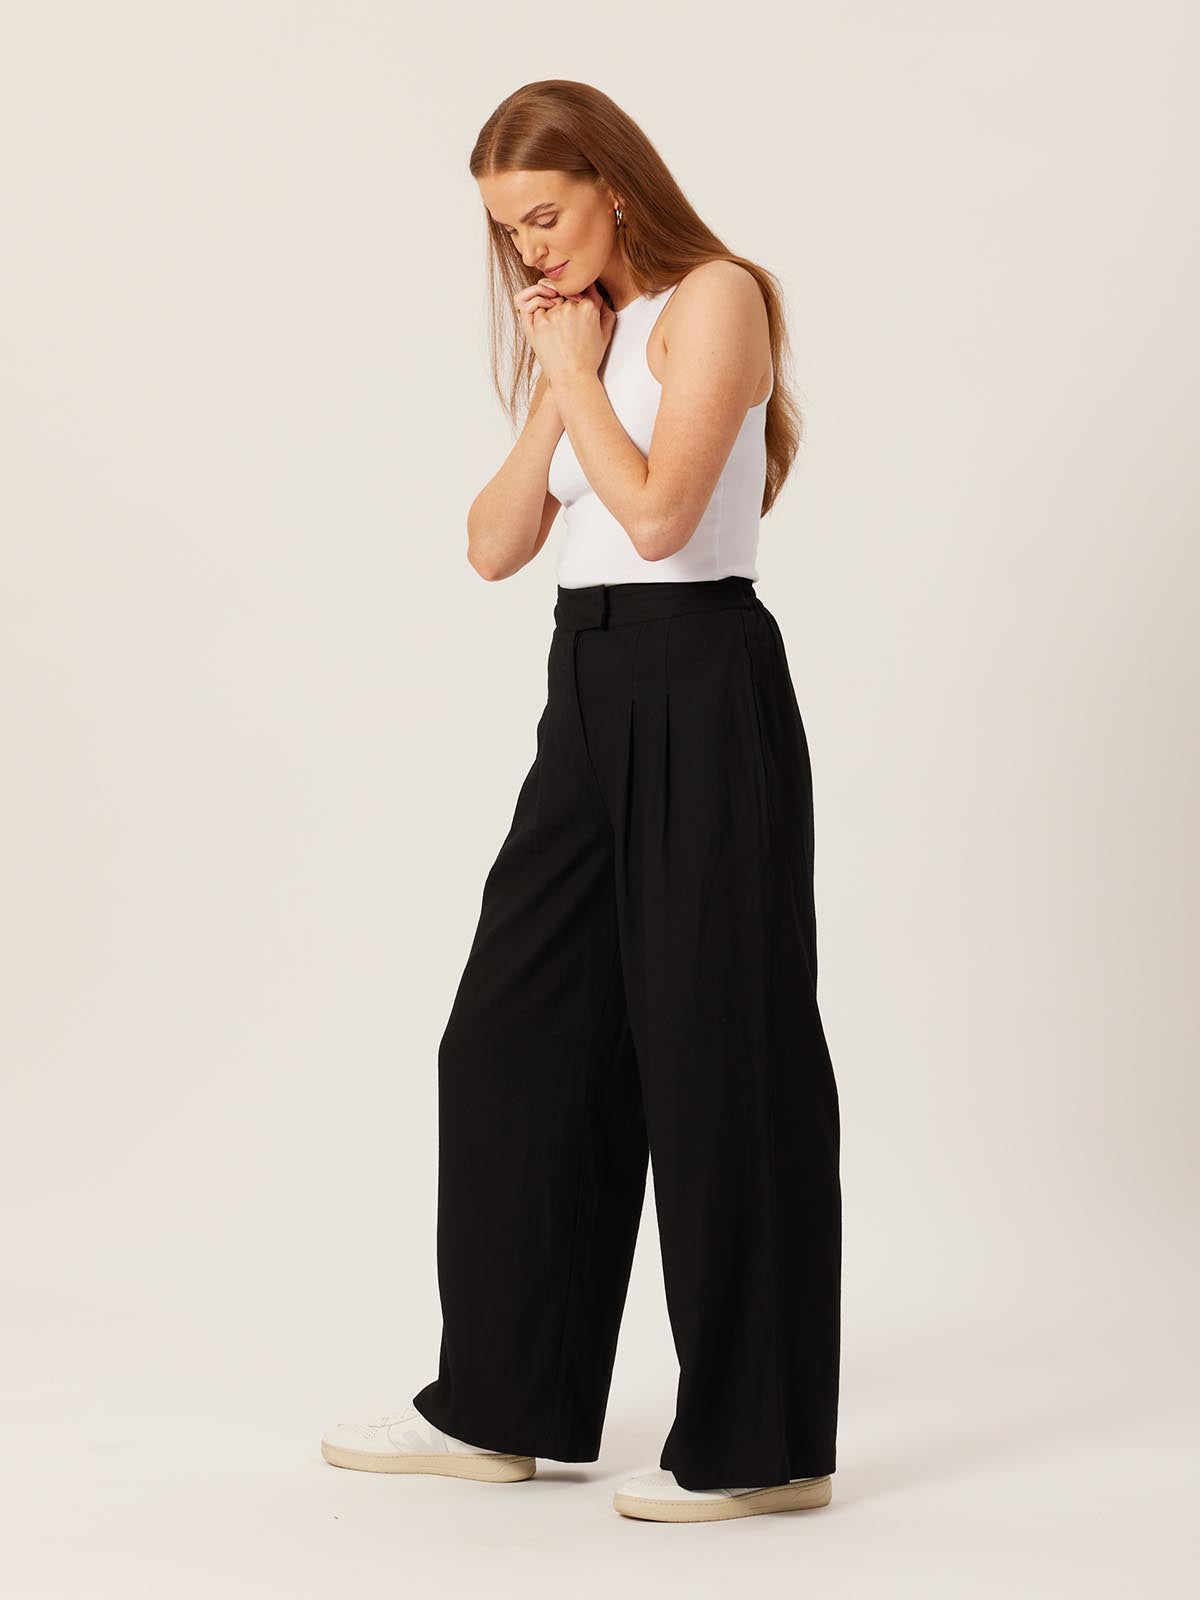 Model wearing the Lana sustainable trousers in black, pictured with their hands clasped and looking down at the ground.